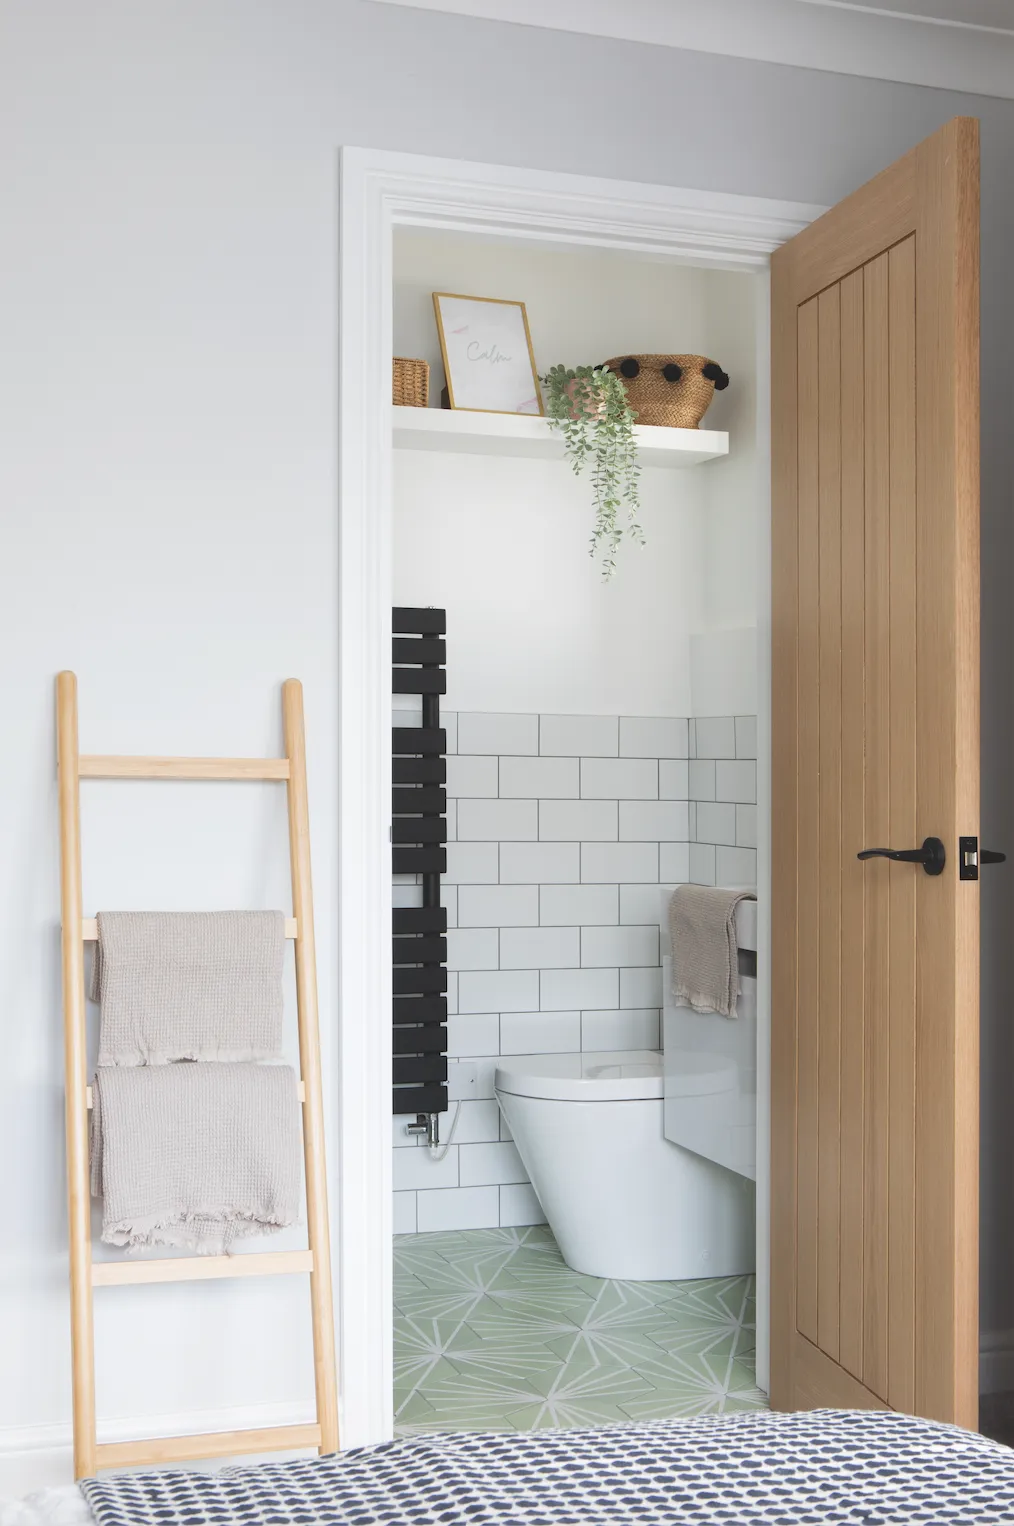 Becca has packed a lot of style into the petite en suite – black accents echo the décor throughout her home, while green floor tiles match the bedroom walls for a sense of flow between the two rooms